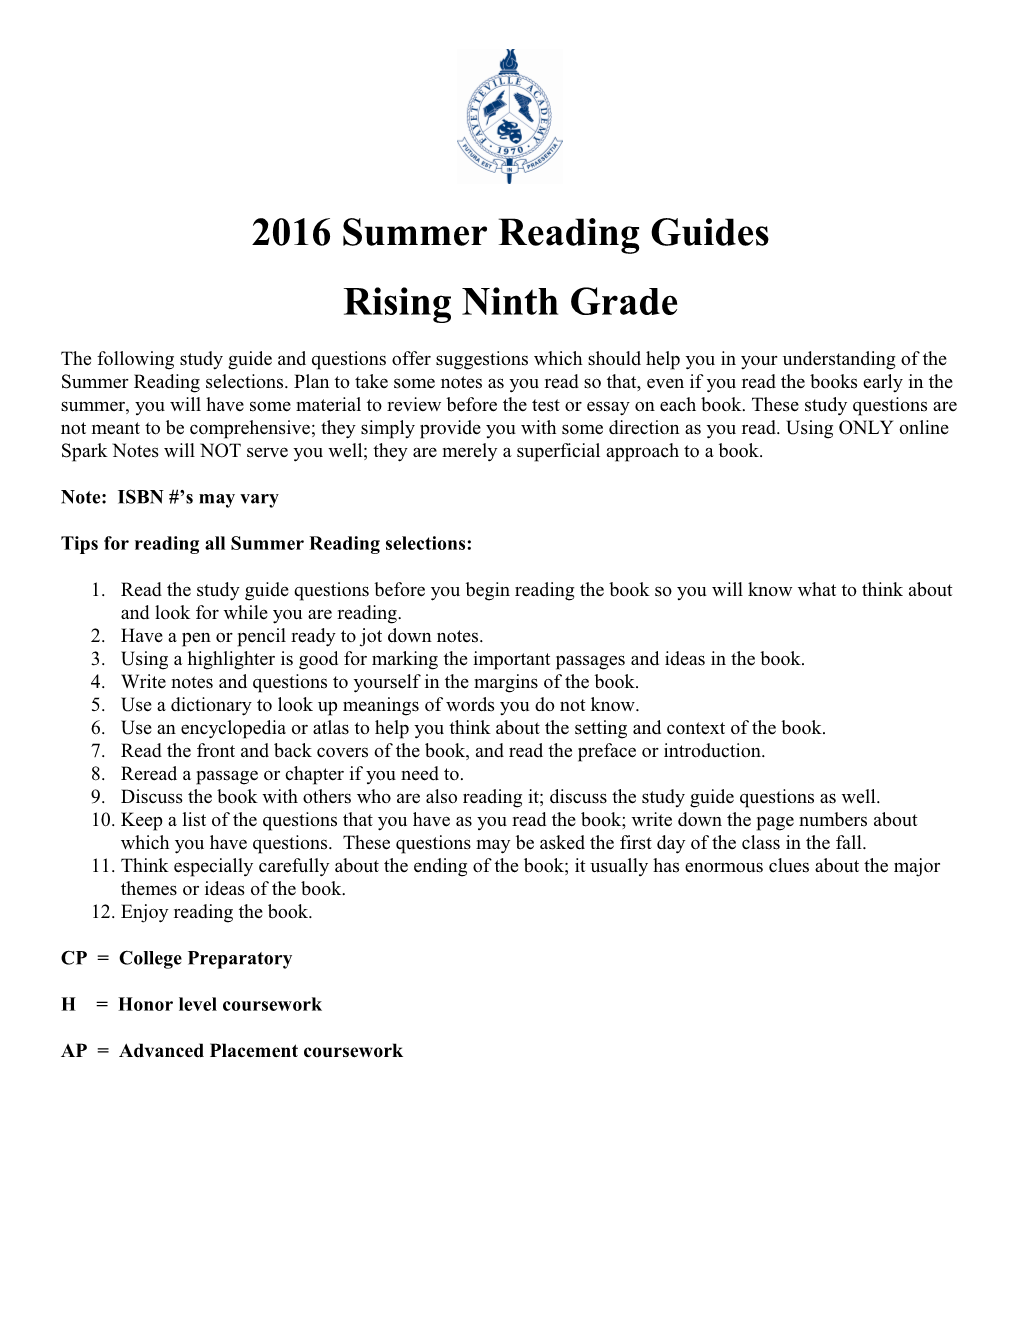 2008 Summer Reading Guides